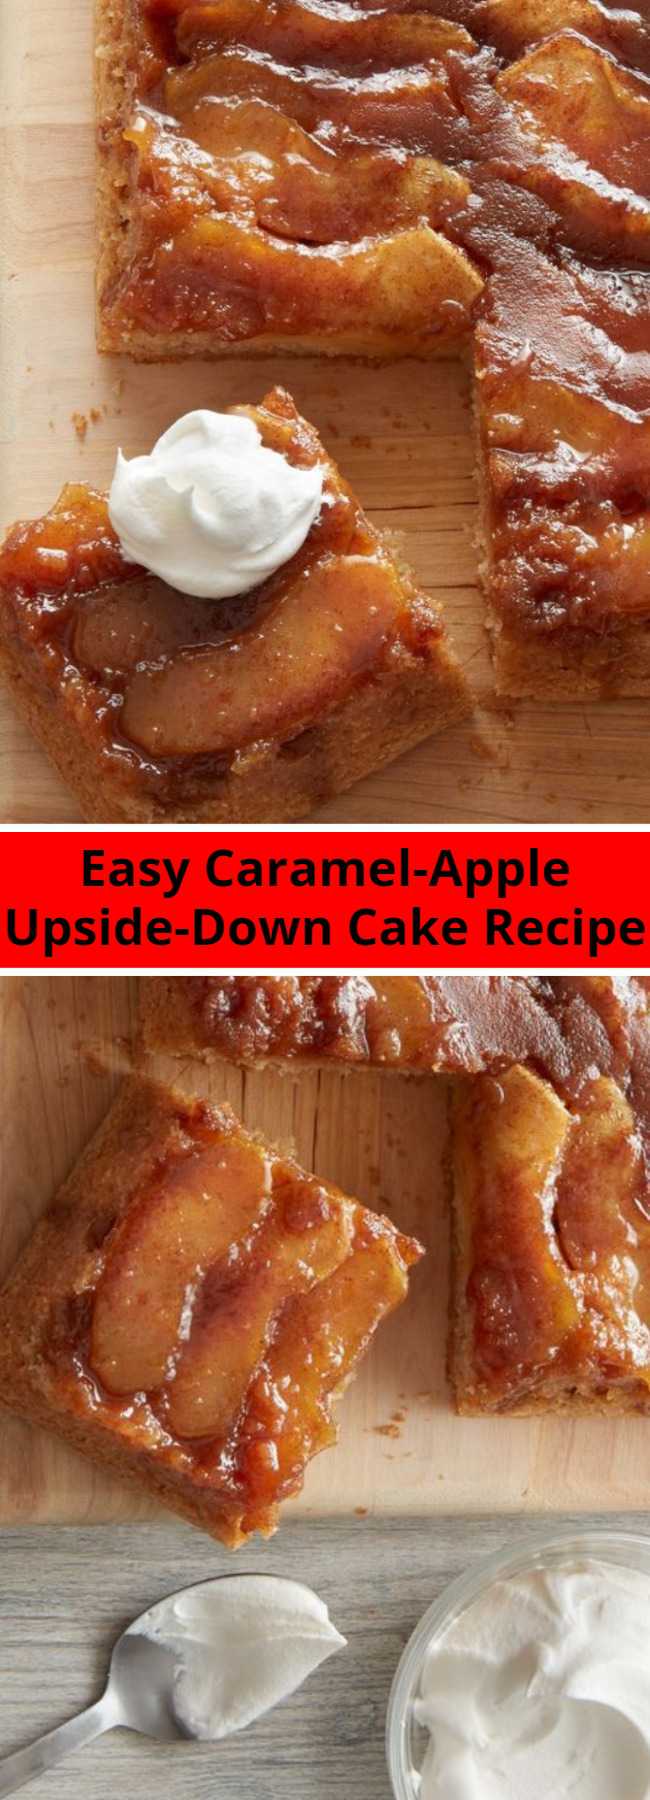 Easy Caramel-Apple Upside-Down Cake Recipe - The best part about the classic pineapple upside-down cake is its gooey fruit topping, and this fresh take on the beloved dessert is no exception. We replaced canned pineapple with fresh apple slices whose tart flavor is the perfect balance to a sticky-sweet caramel sauce. We don't like to play favorites, but this topping plus a tender vanilla scratch cake equals an easy modern-day treat that may just outdo the original.